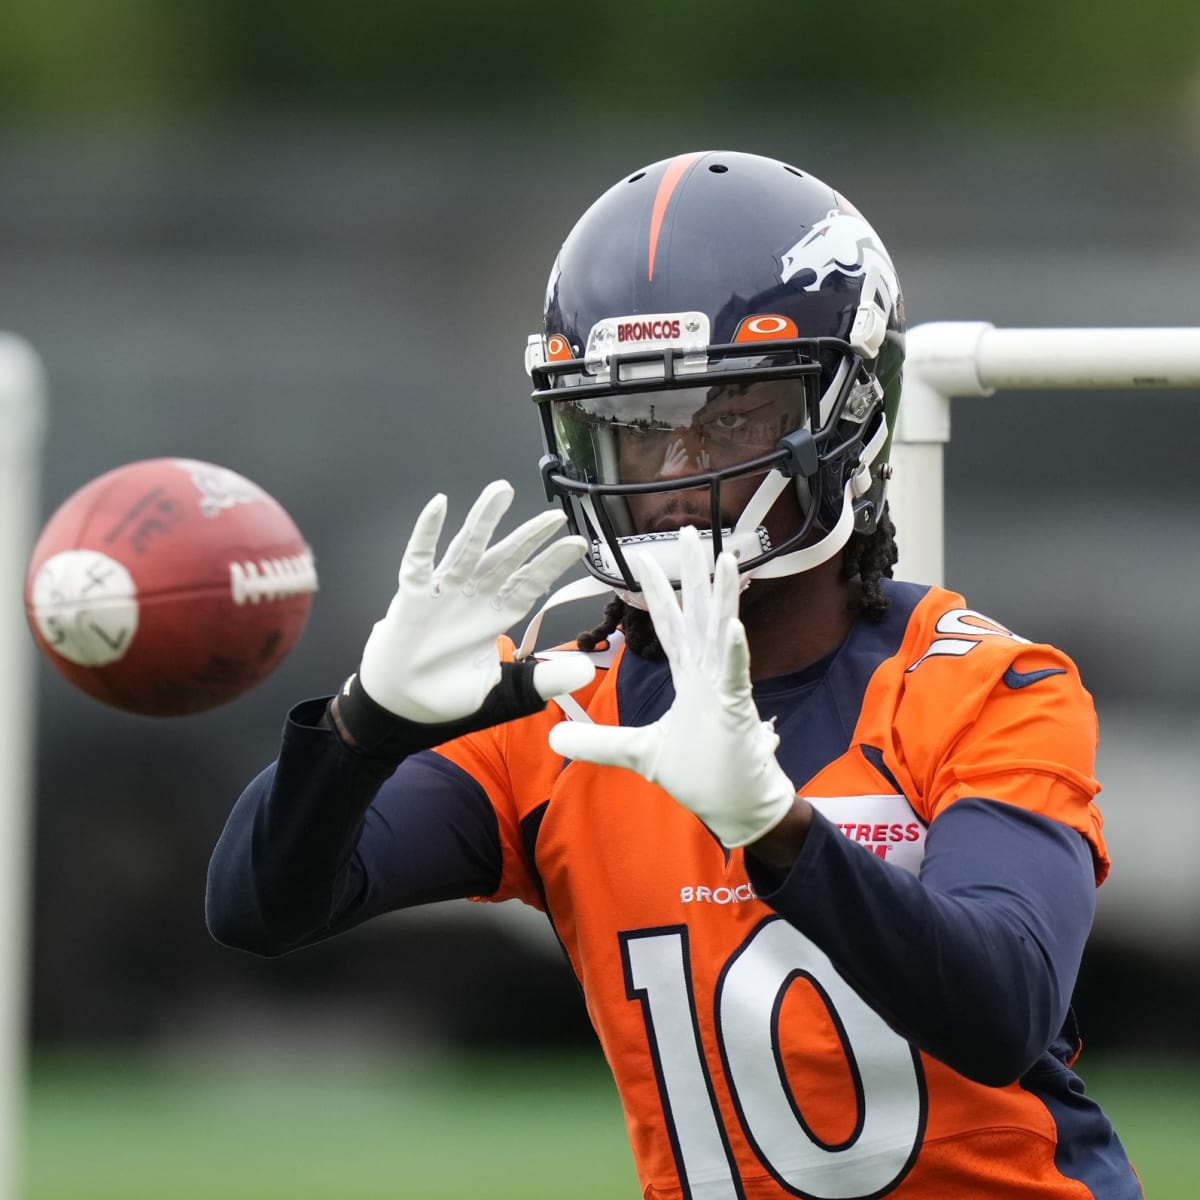 Broncos WR Jerry Jeudy: Drops held me back during 2020 rookie season